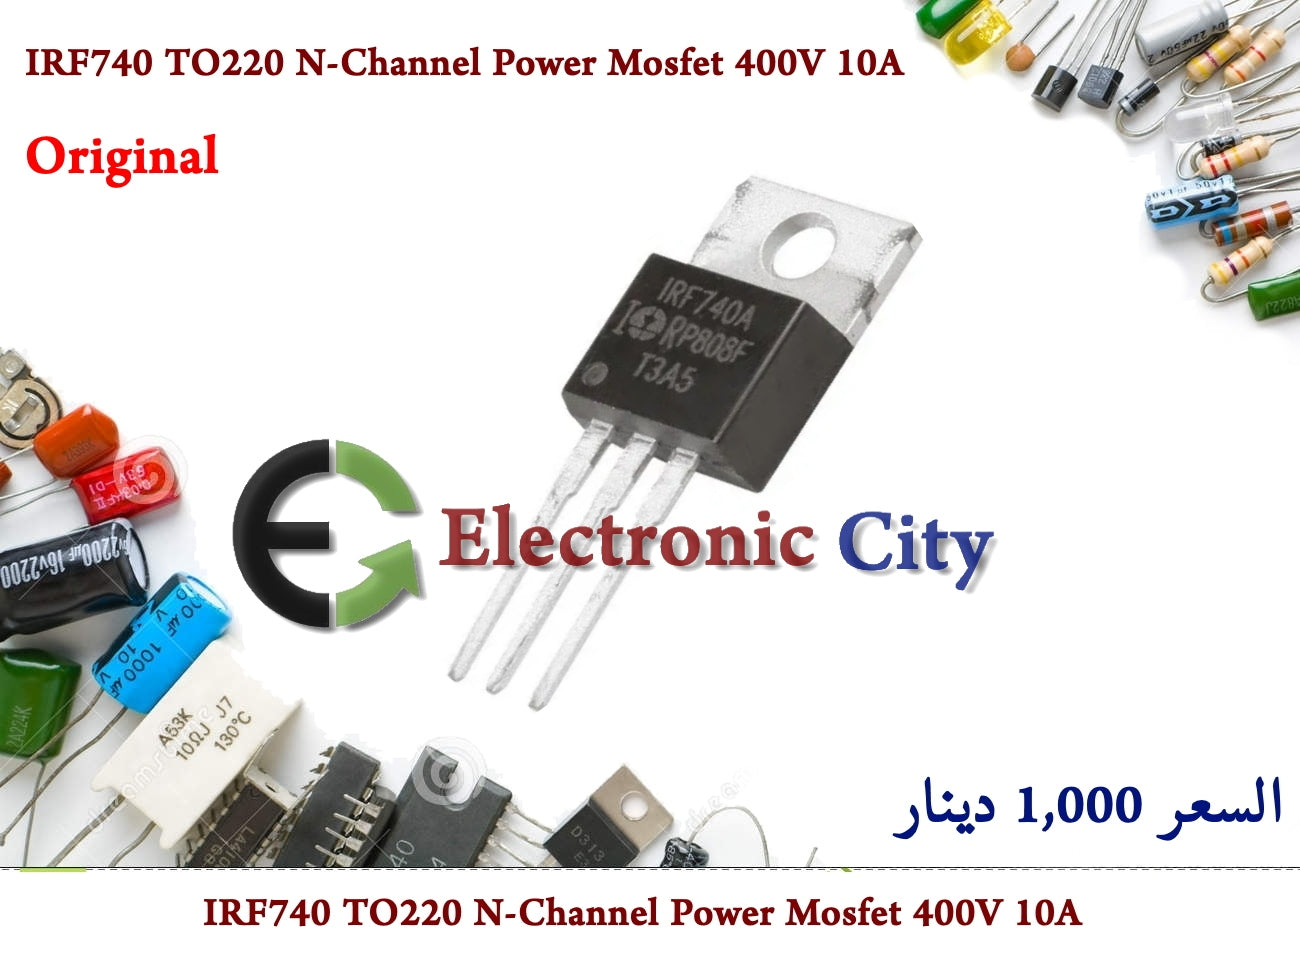 IRF740 TO220 N-Channel Power Mosfet 400V 10A